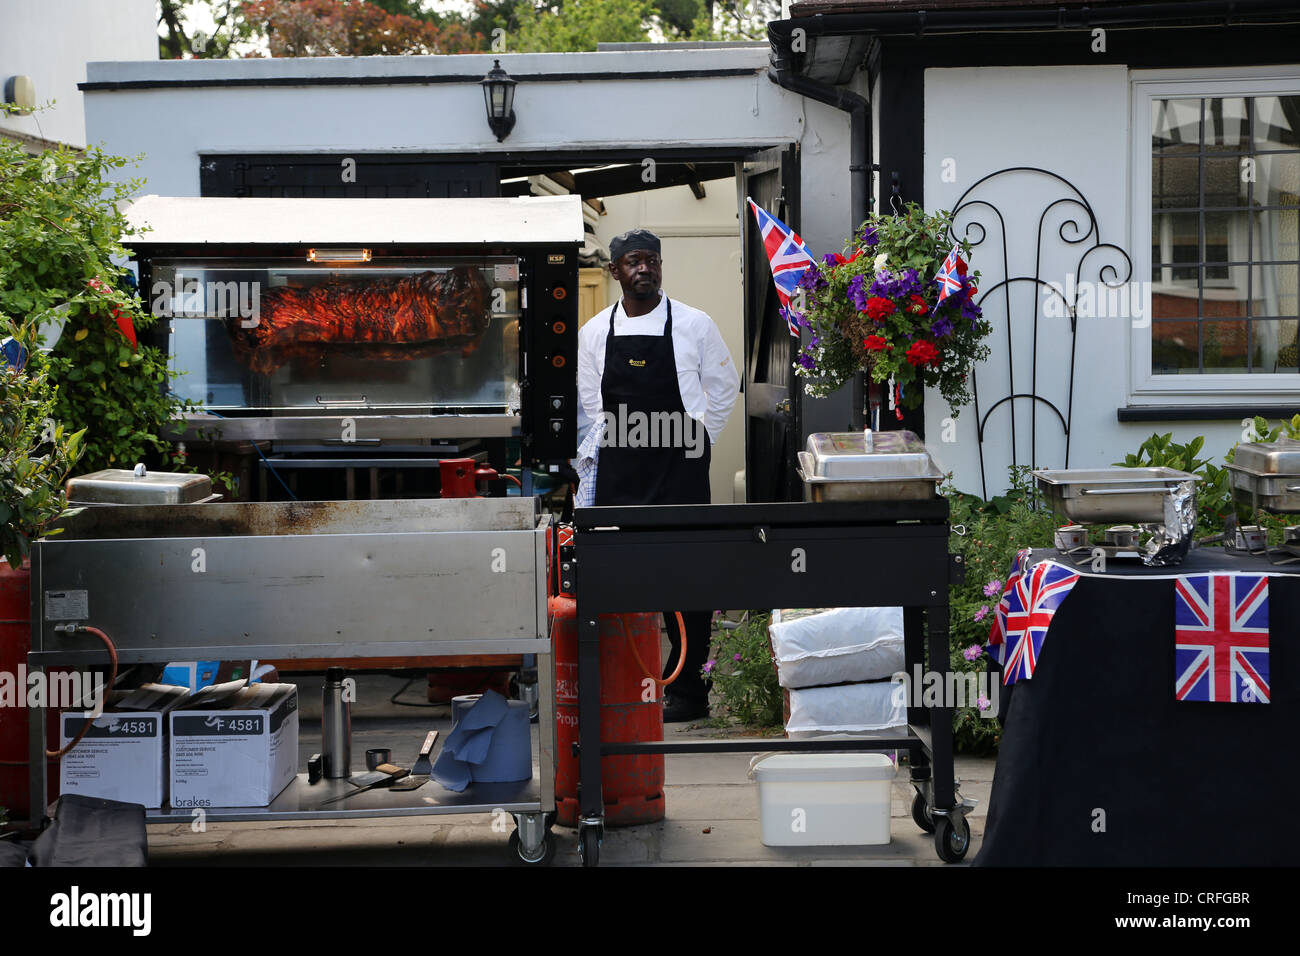 Chef With Pig On Spit At Street Party For The The Queen's Diamond Jubilee Surrey England Stock Photo